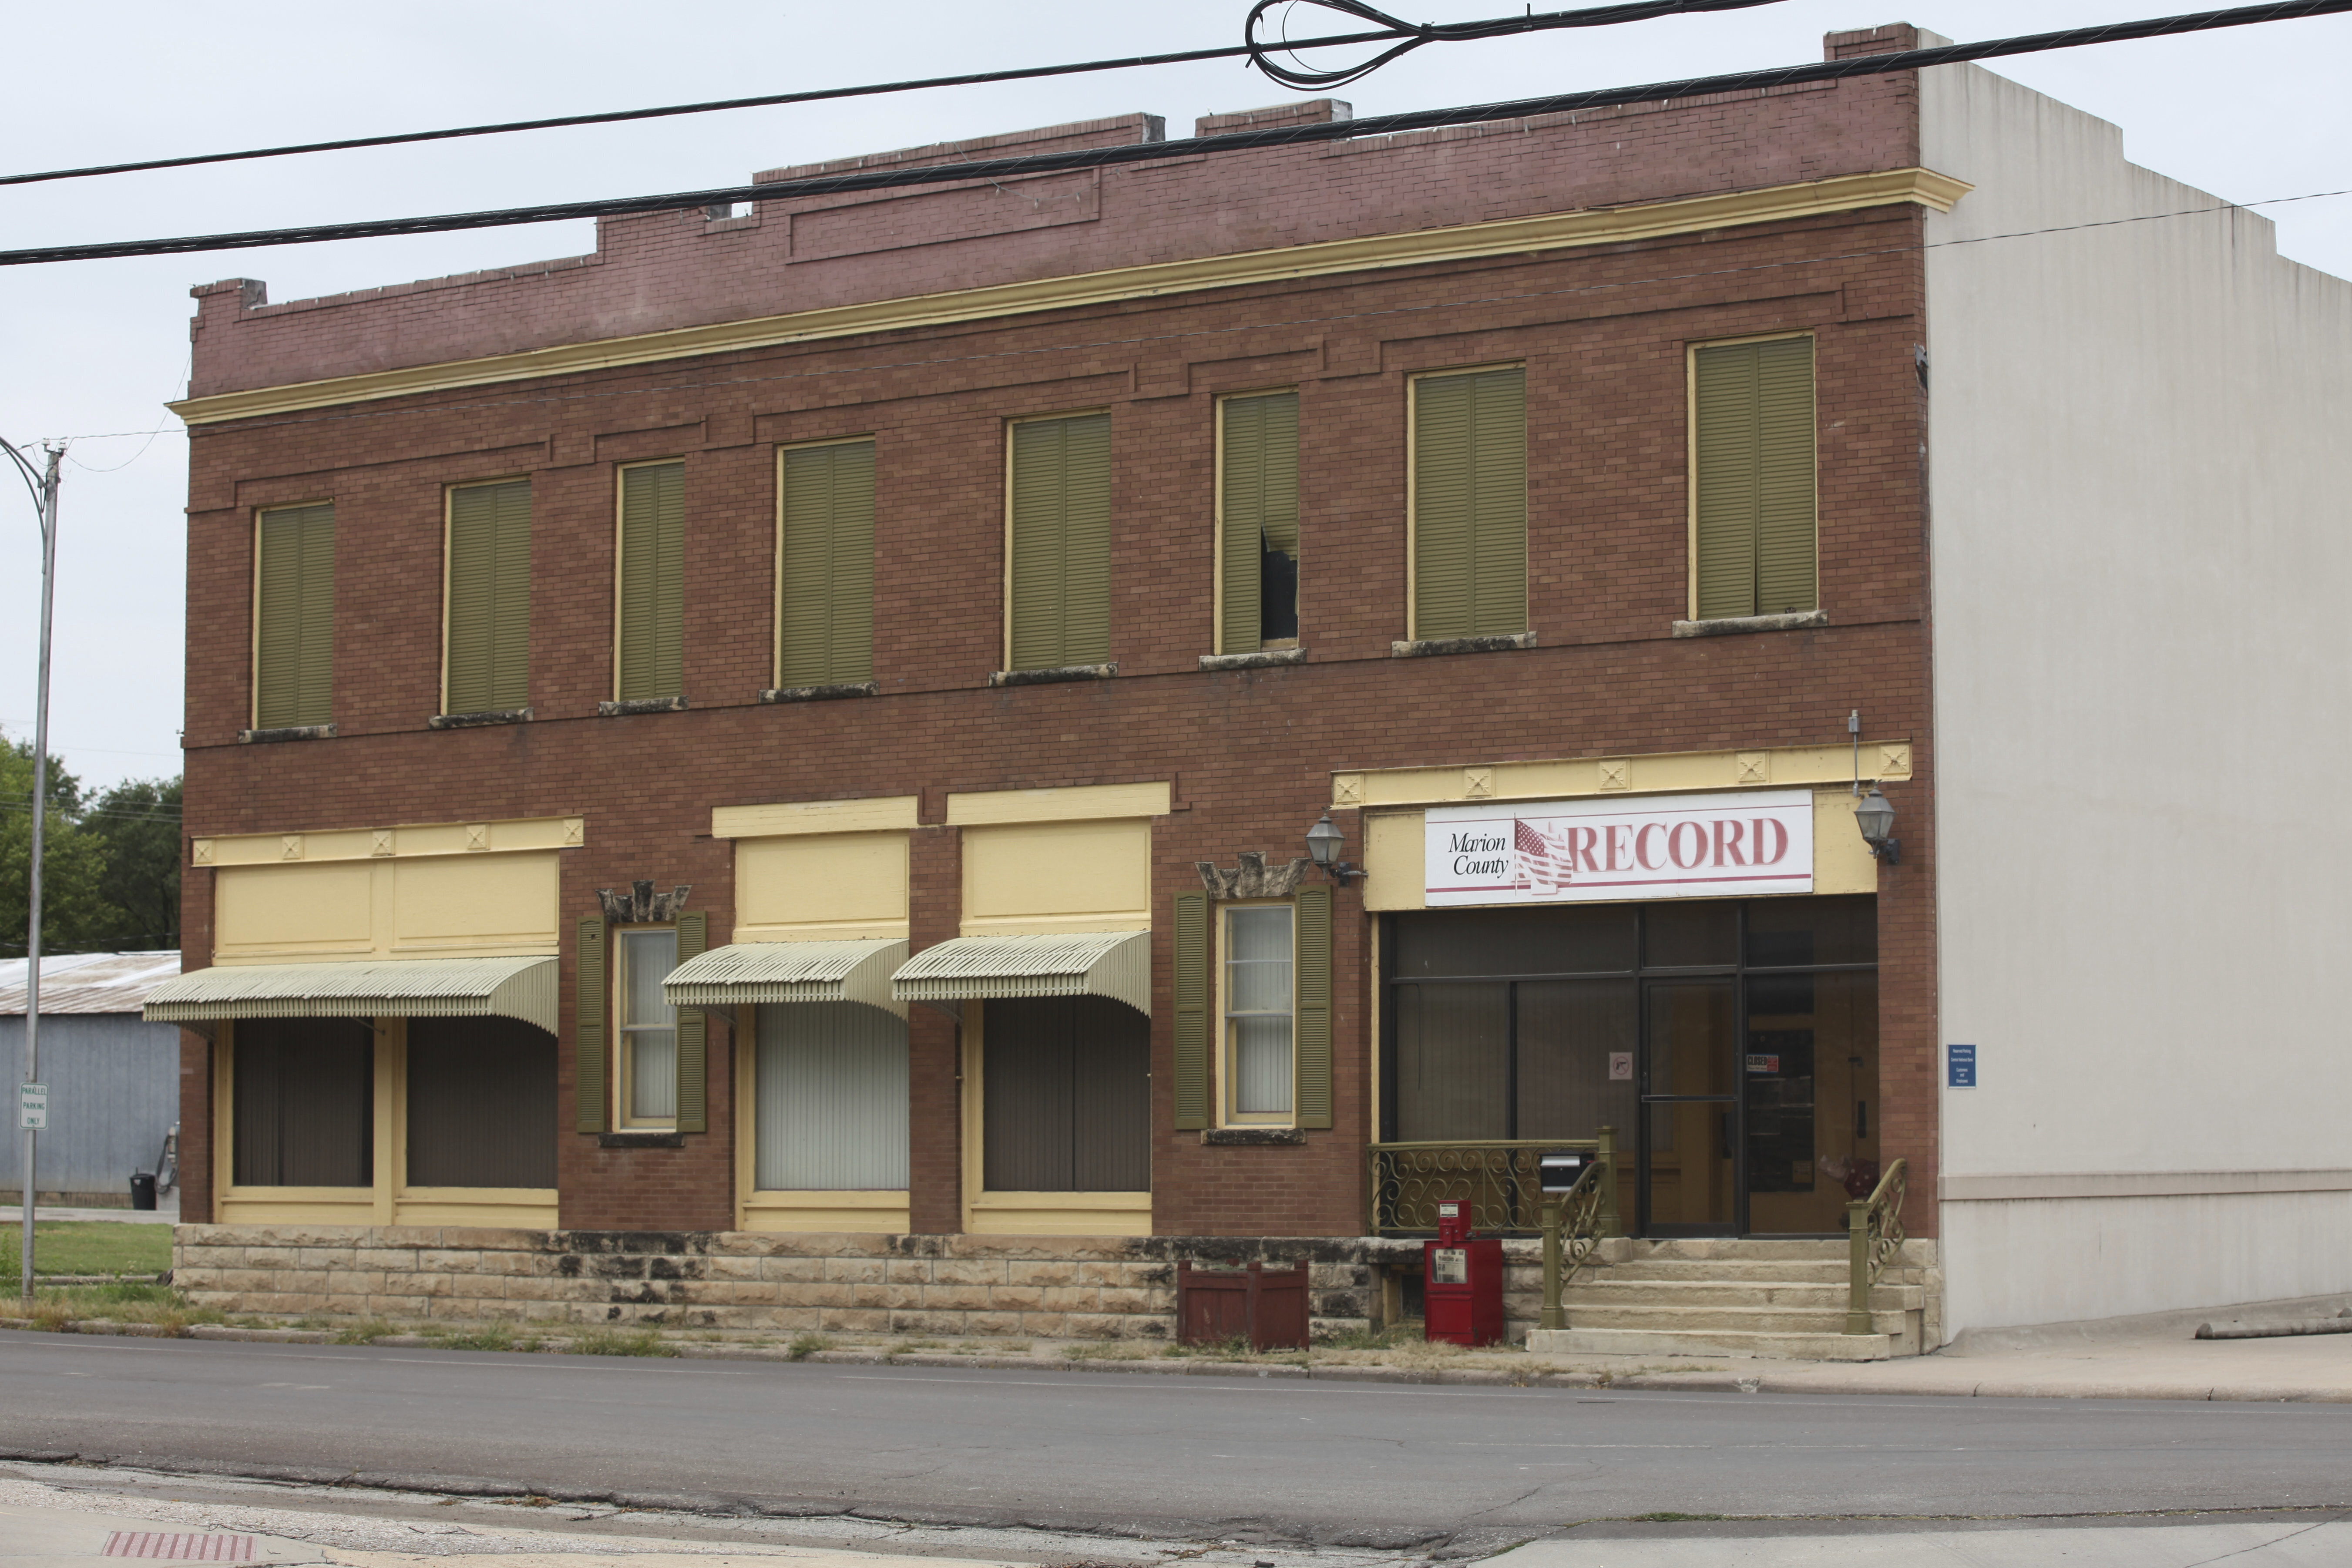 Offices of the Marion County Record 